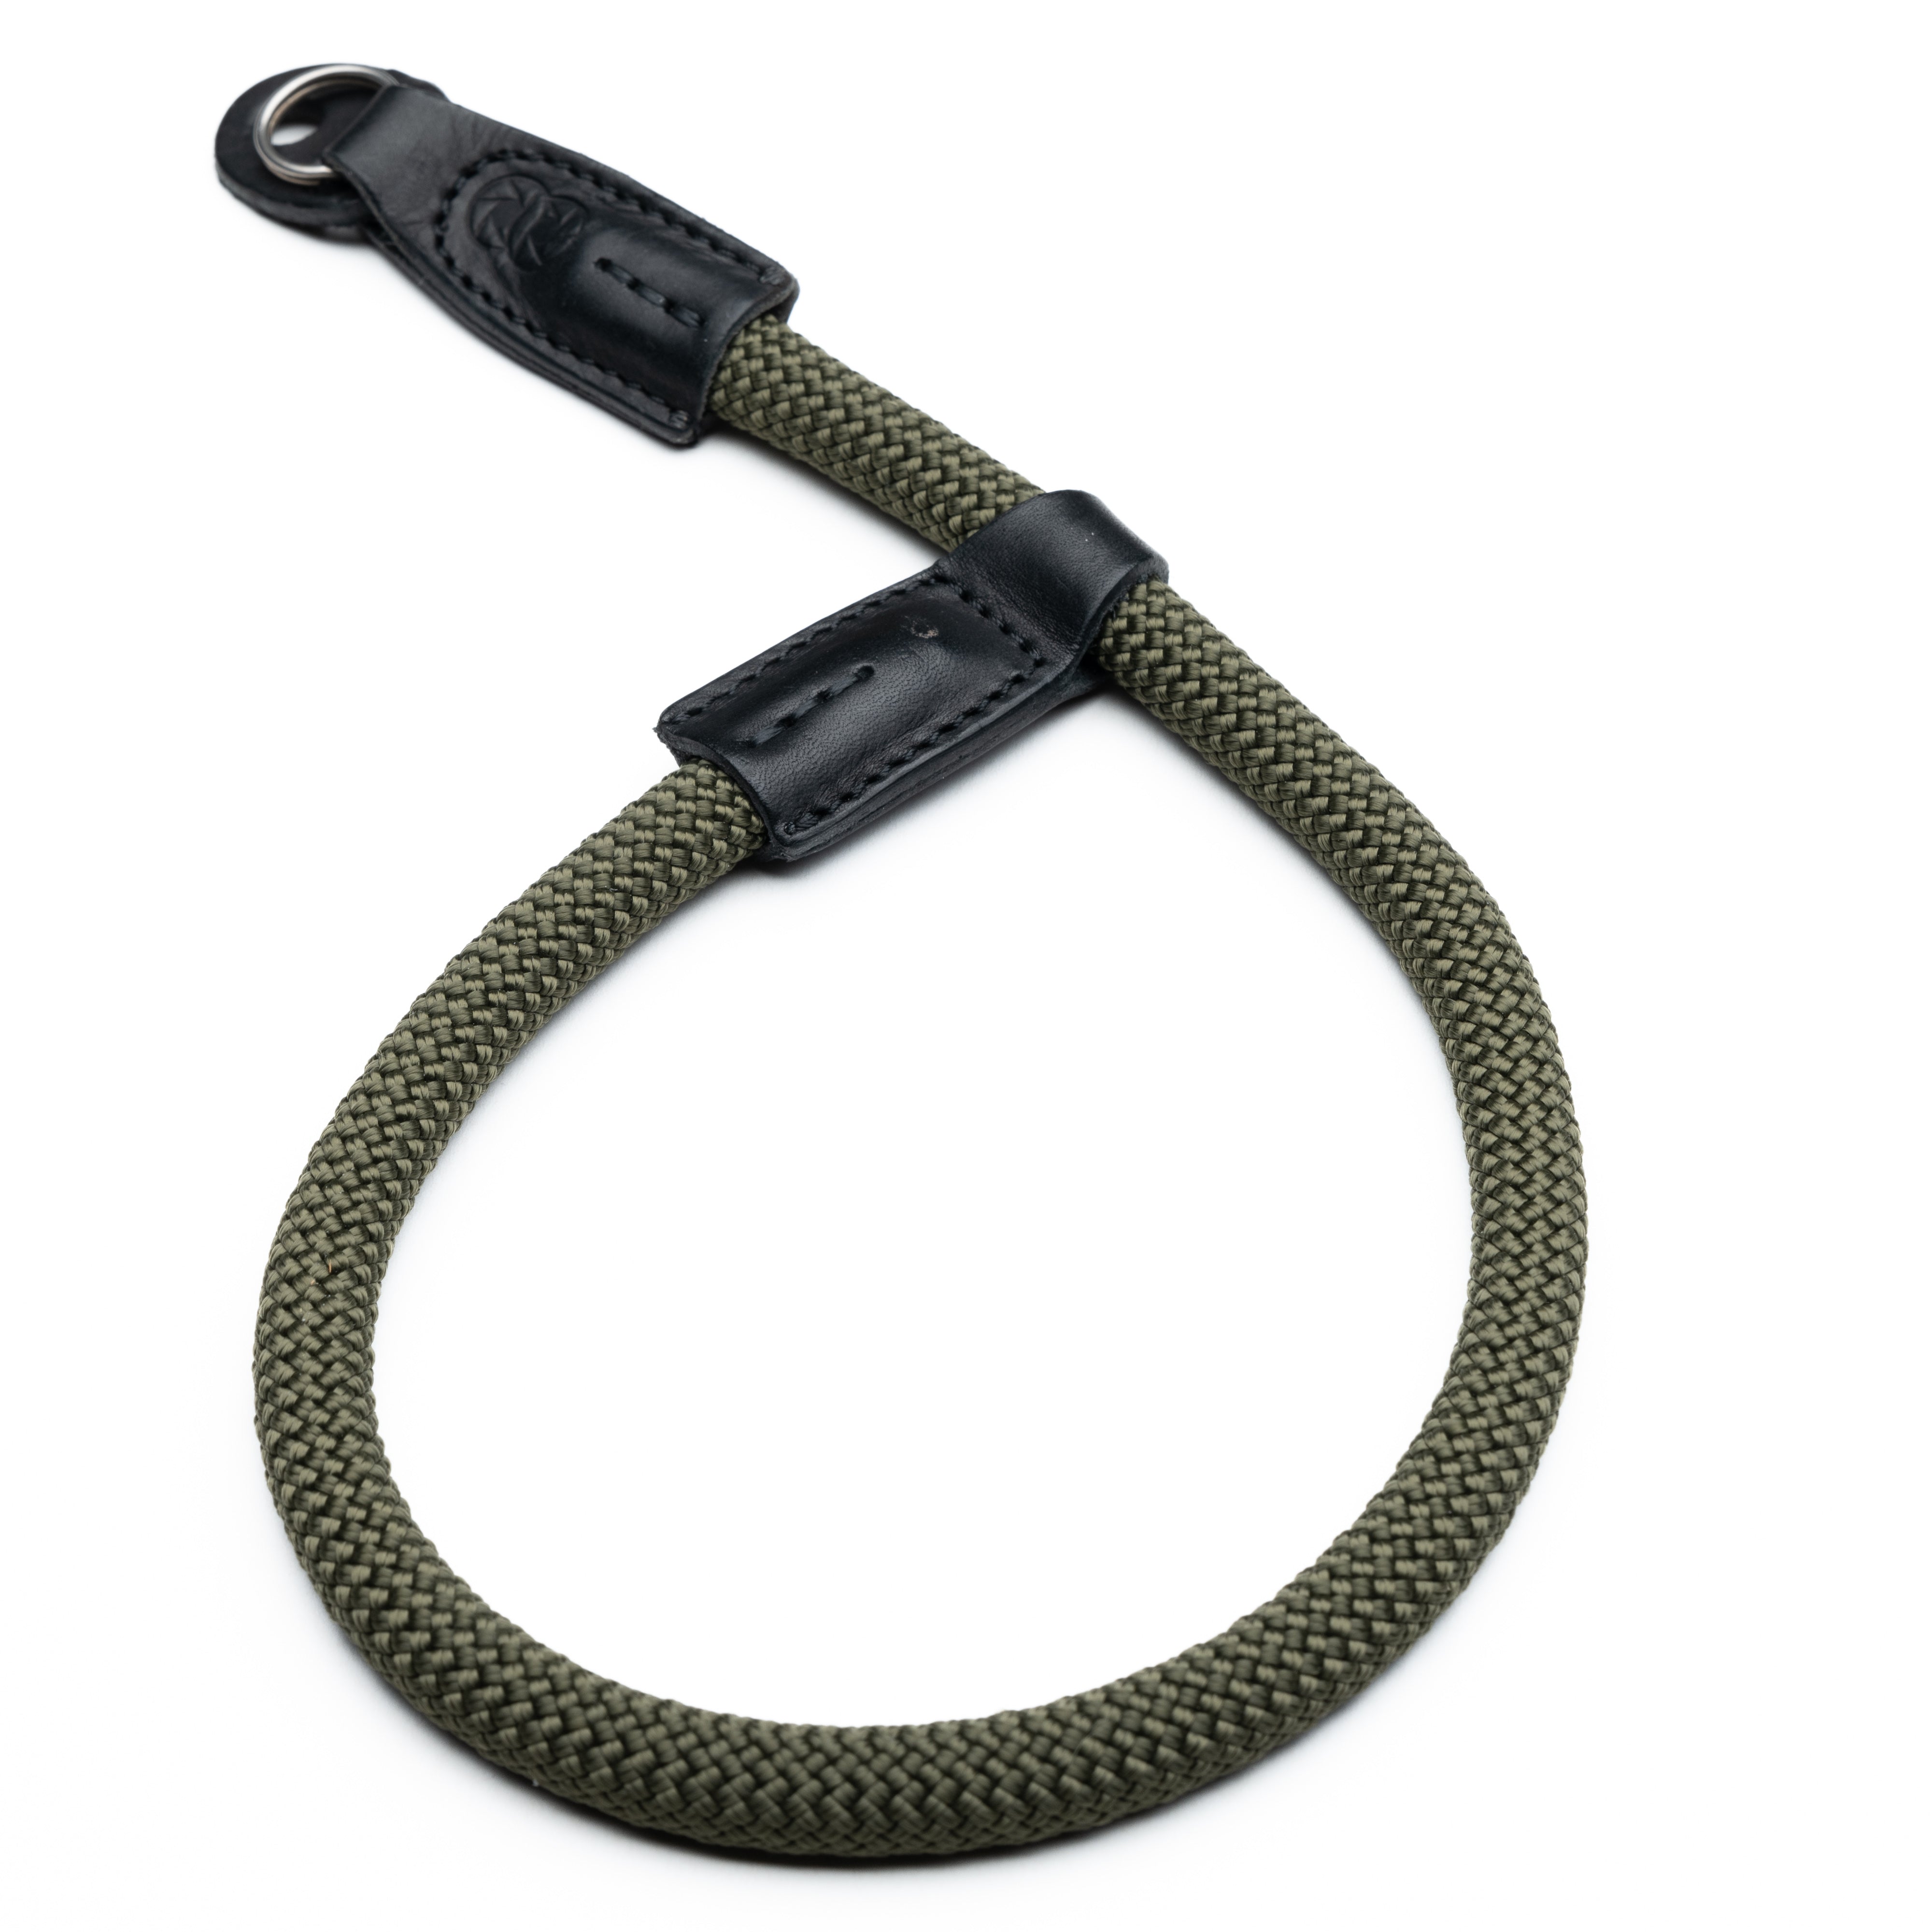 Hoodman 10mm Climbing Rope Handstrap for Camera with Lens Up to 5 Lbs,  Black HCWS1B